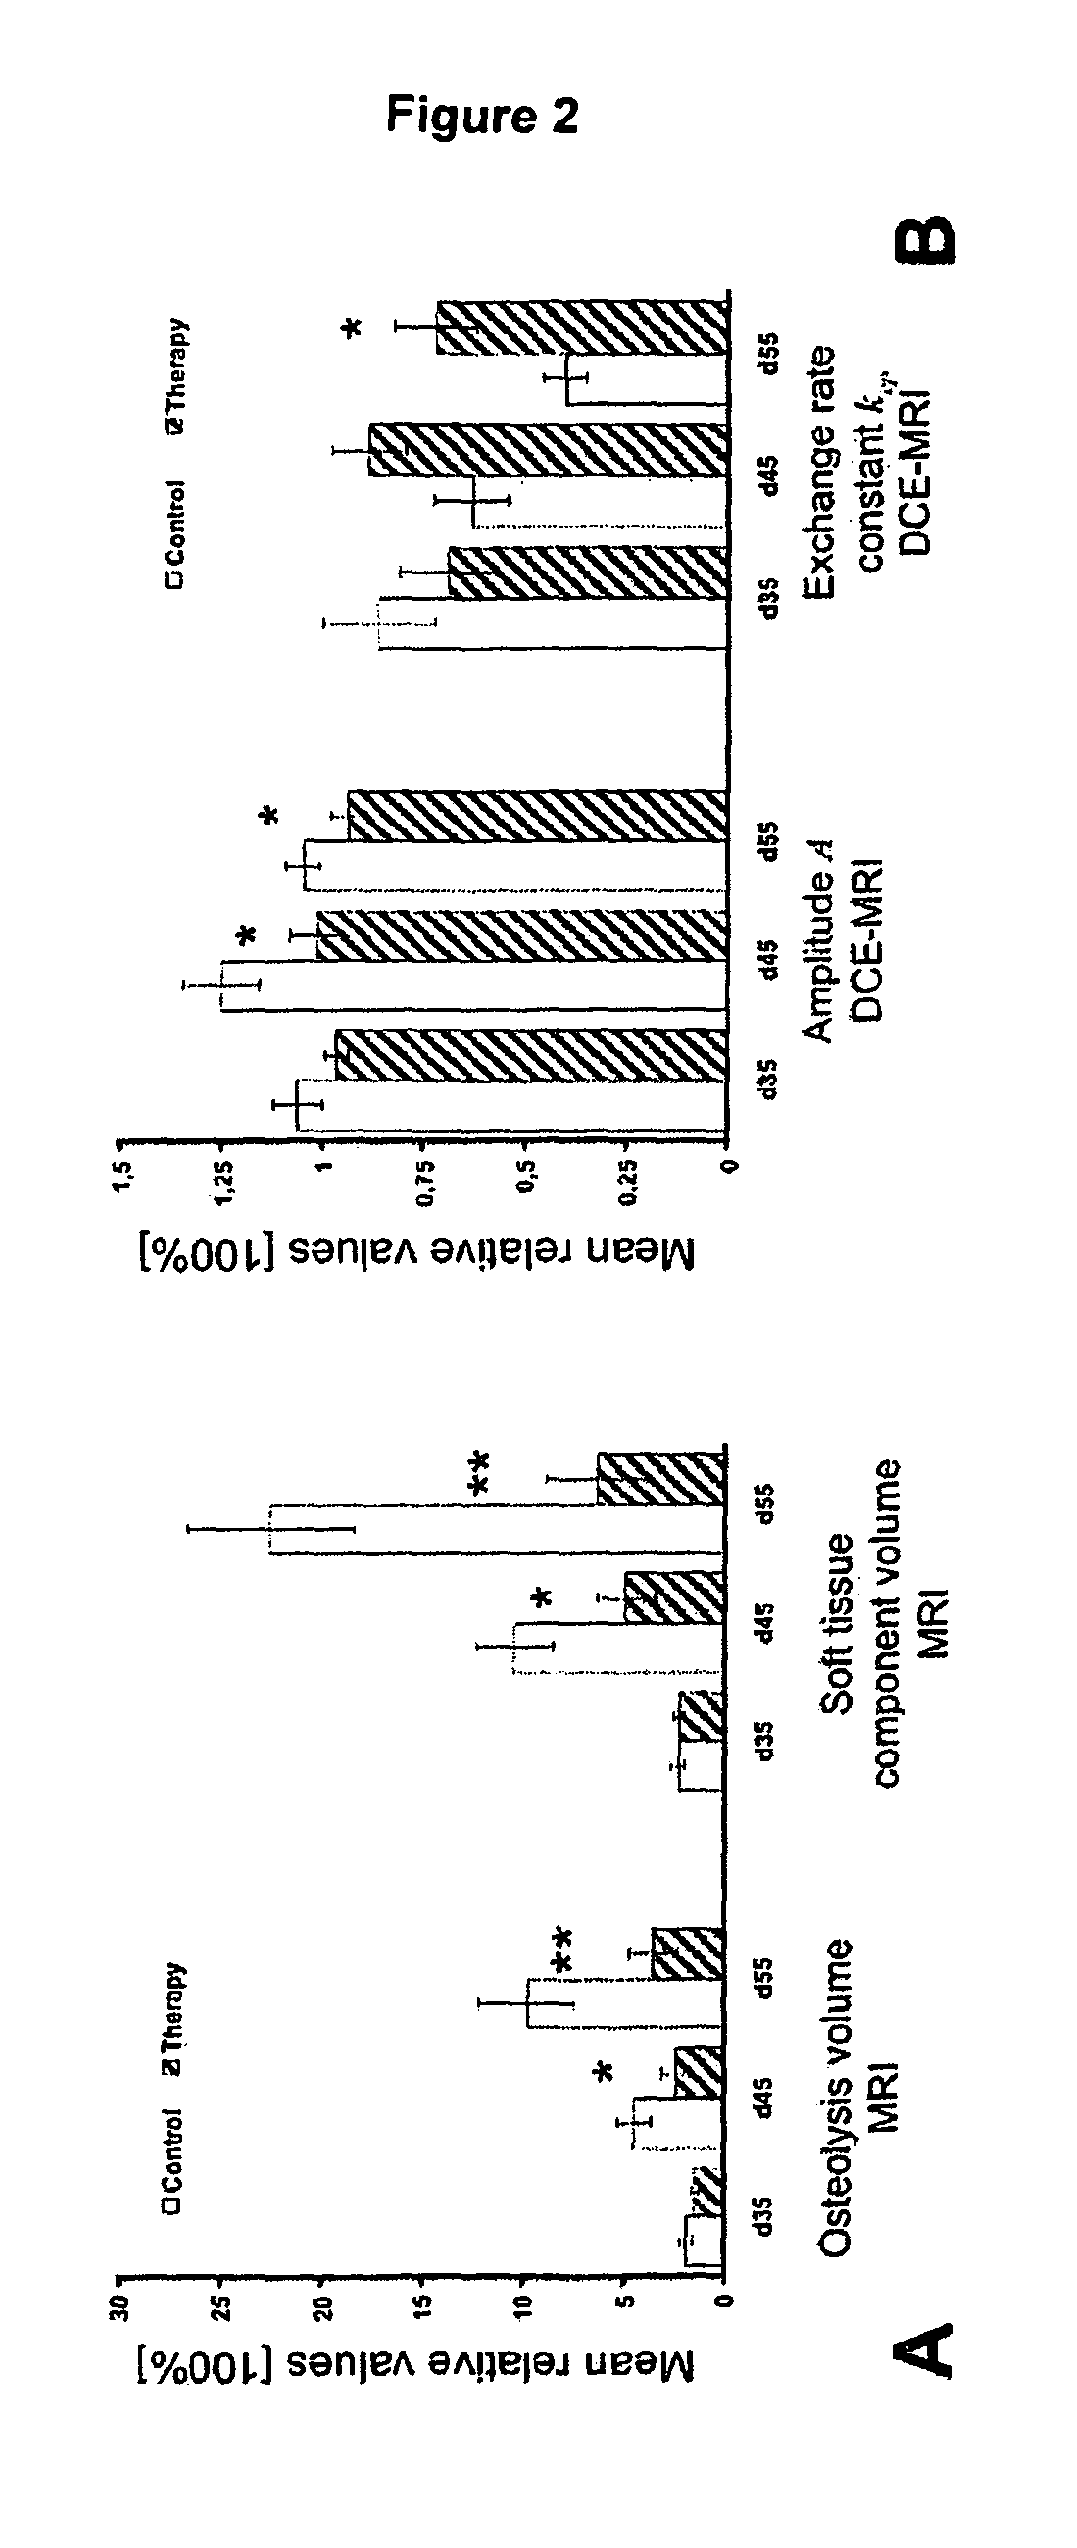 Peptide for Use in the Treatment of Breast Cancer and/or Bone Metastases